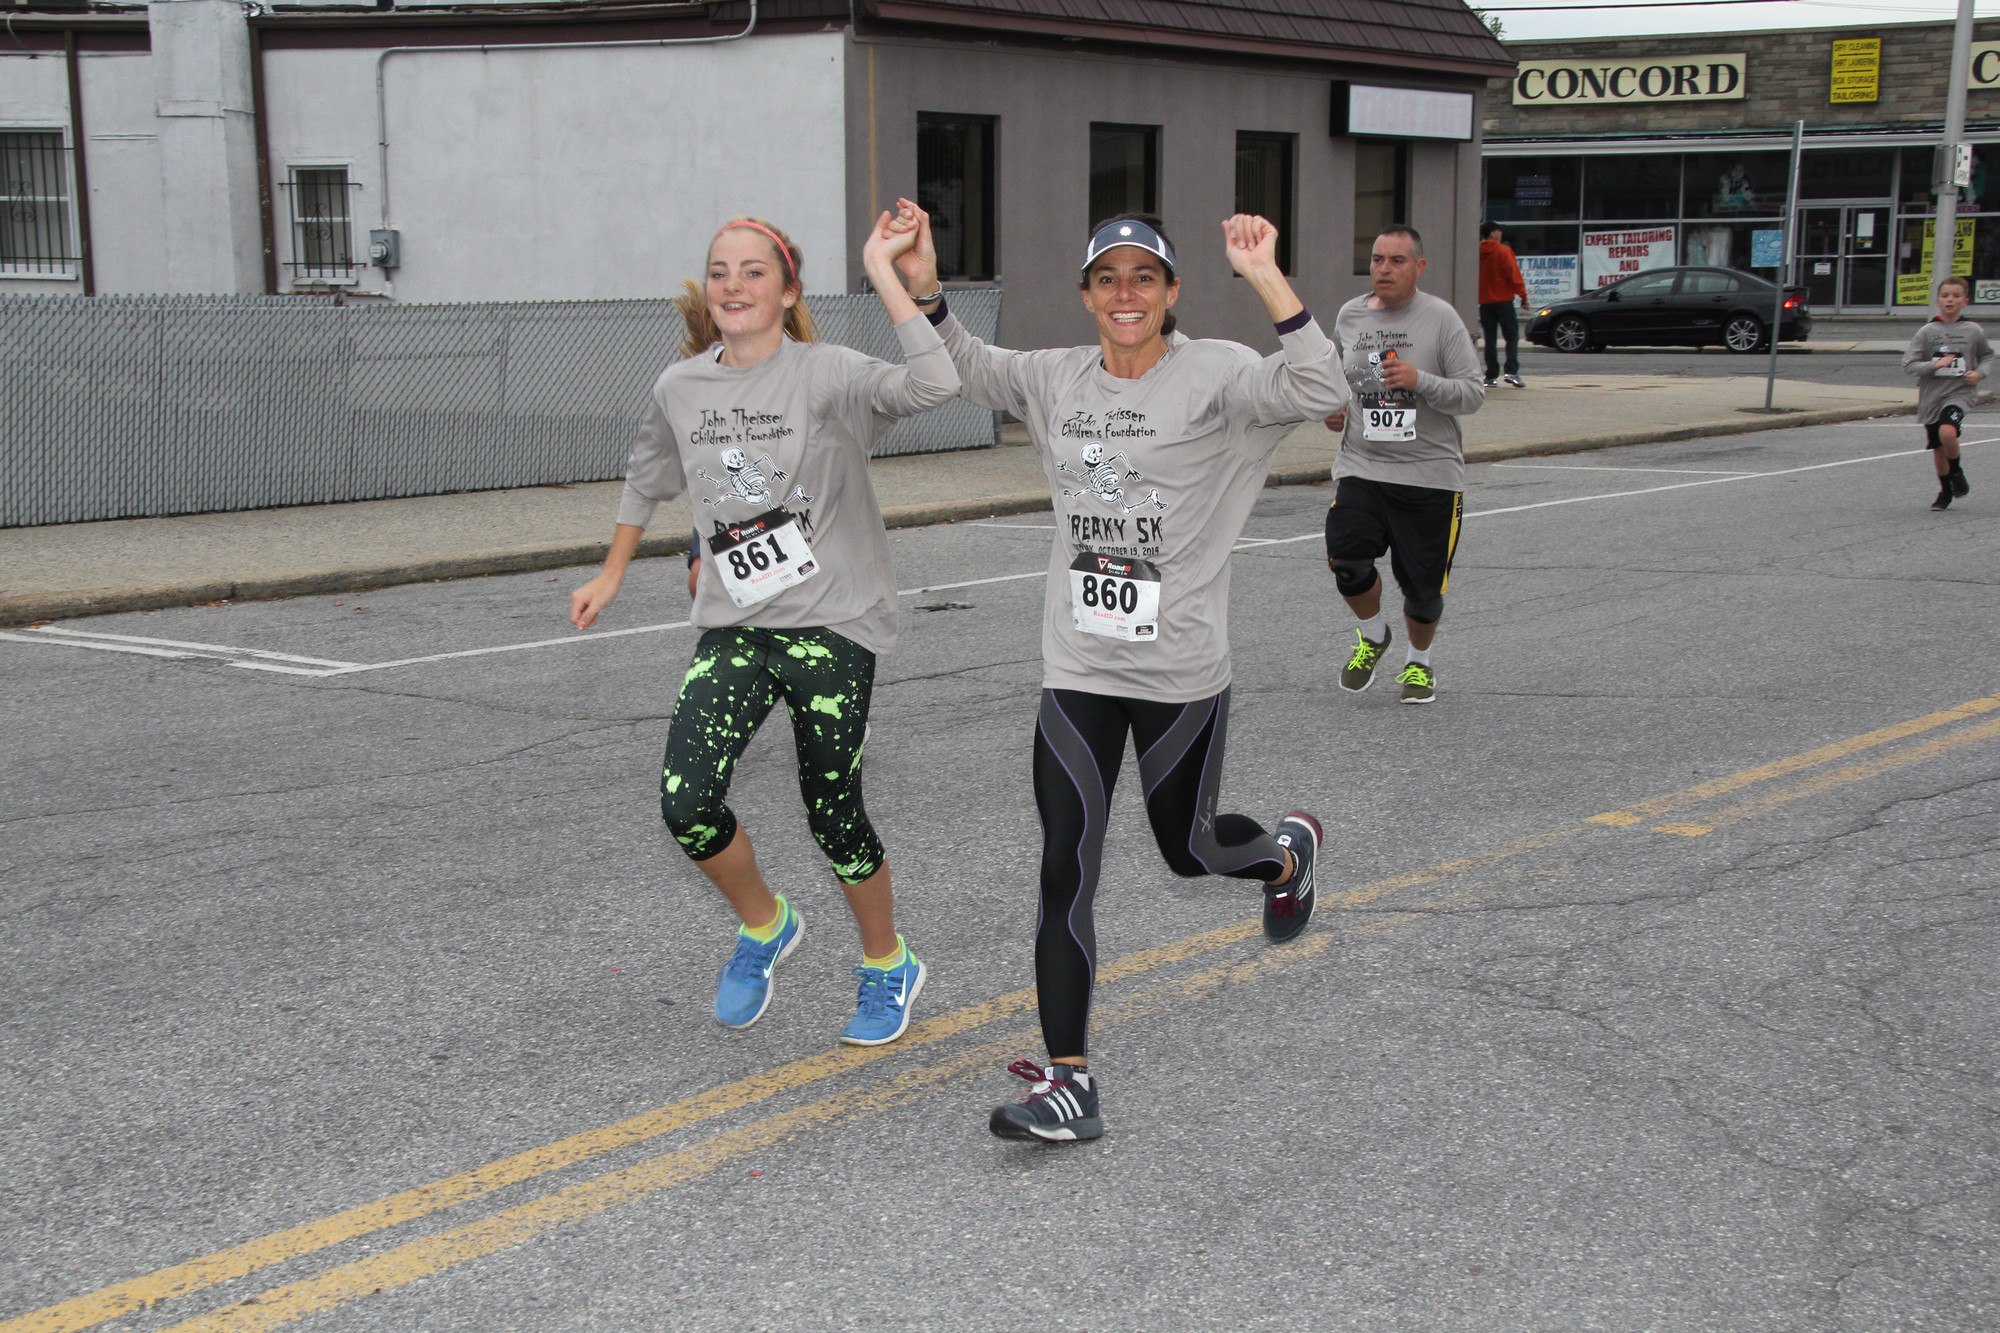 More than 550 runners took part in the race.